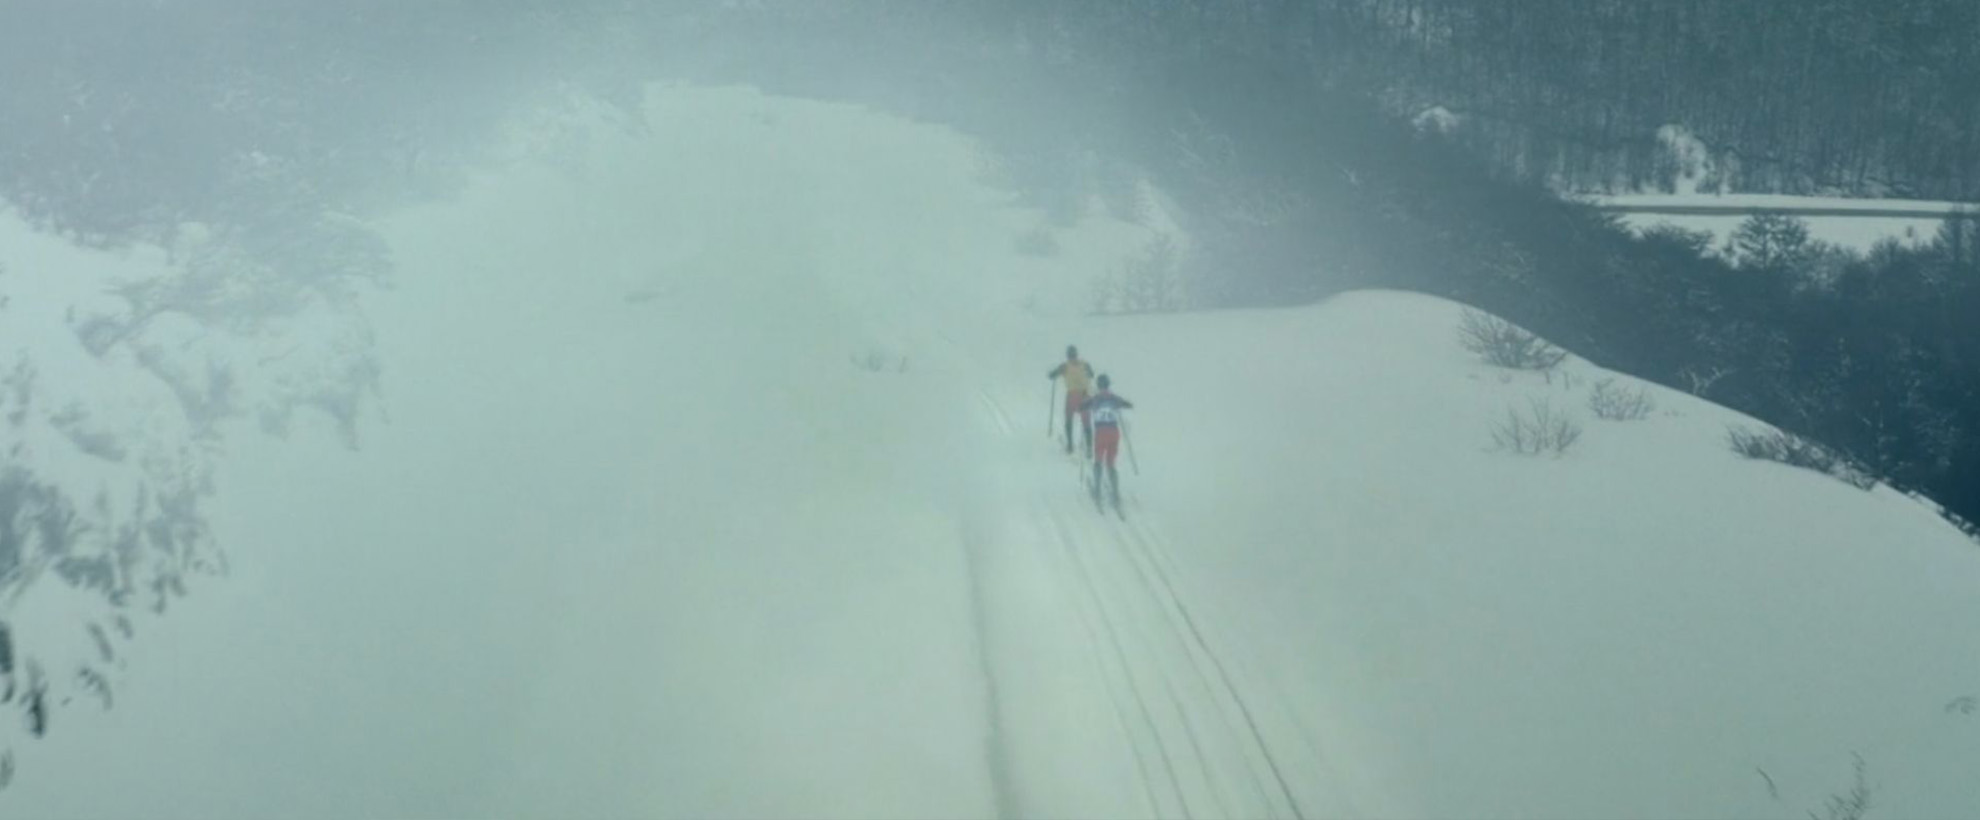 Two people cross country ski through the snow